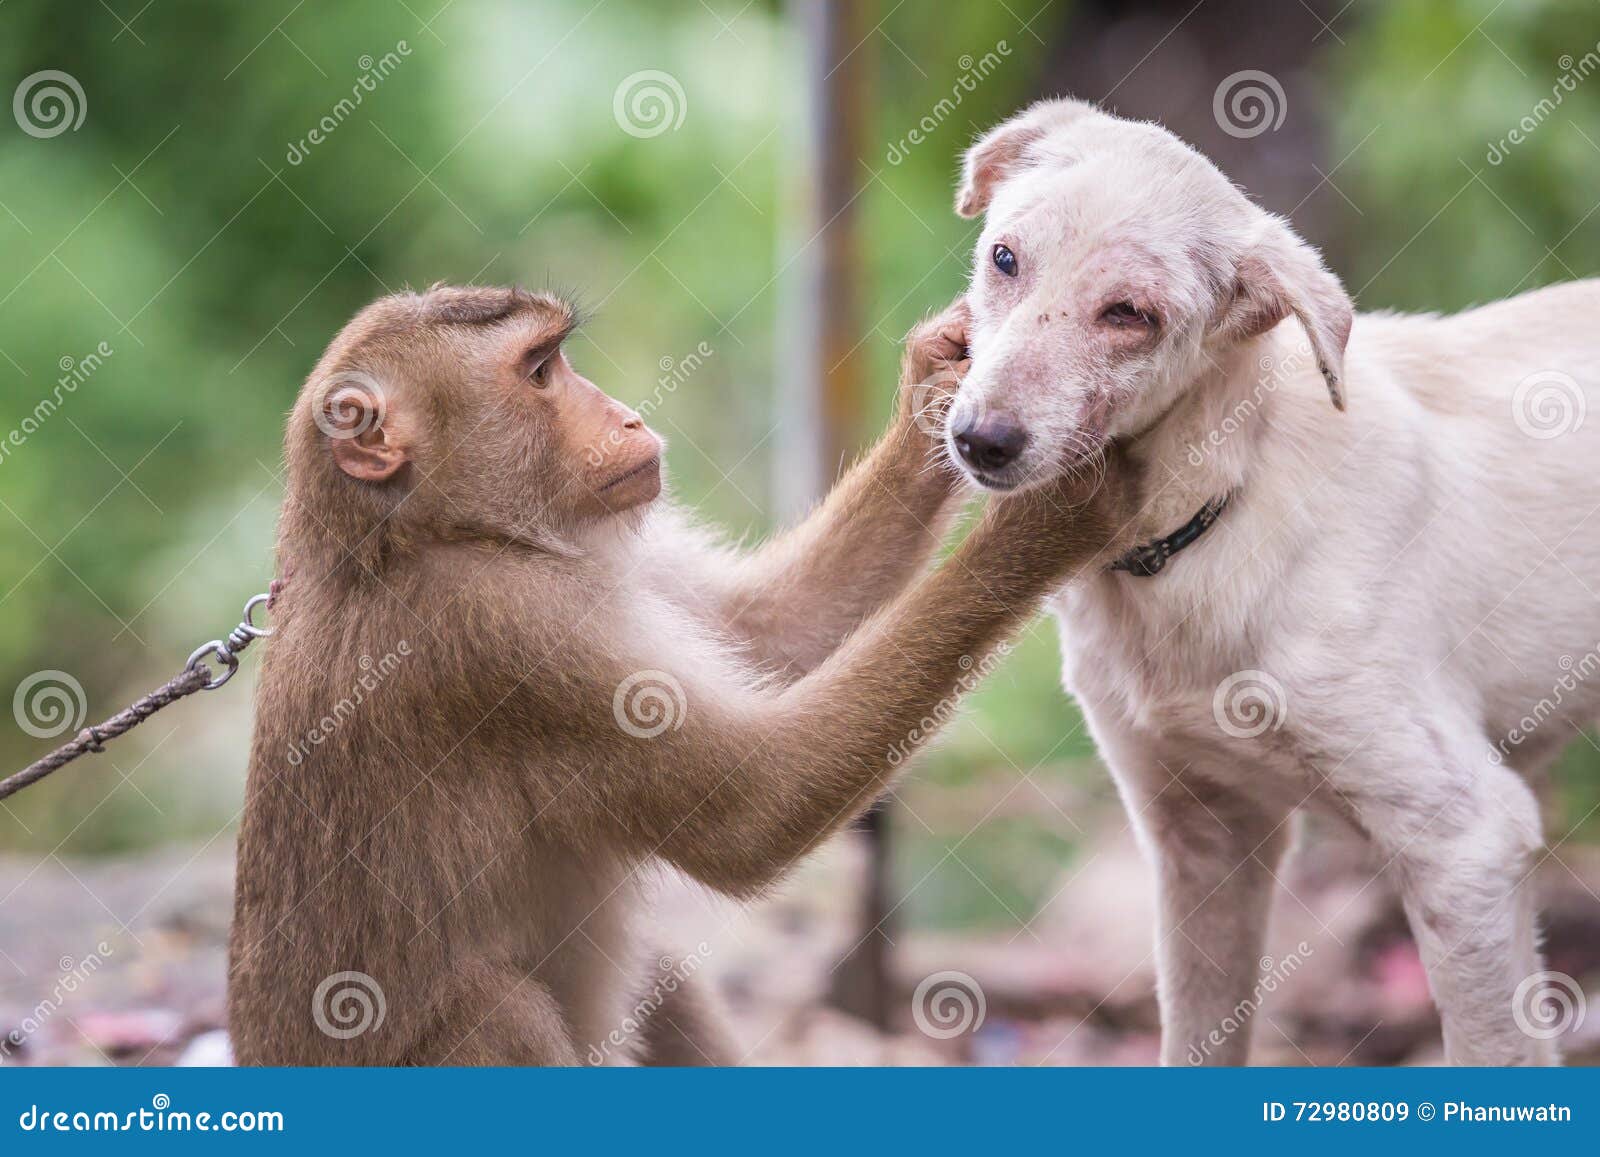 Monkey Checking for Fleas and Ticks in the Dog Stock Image - Image of  groom, green: 72980809